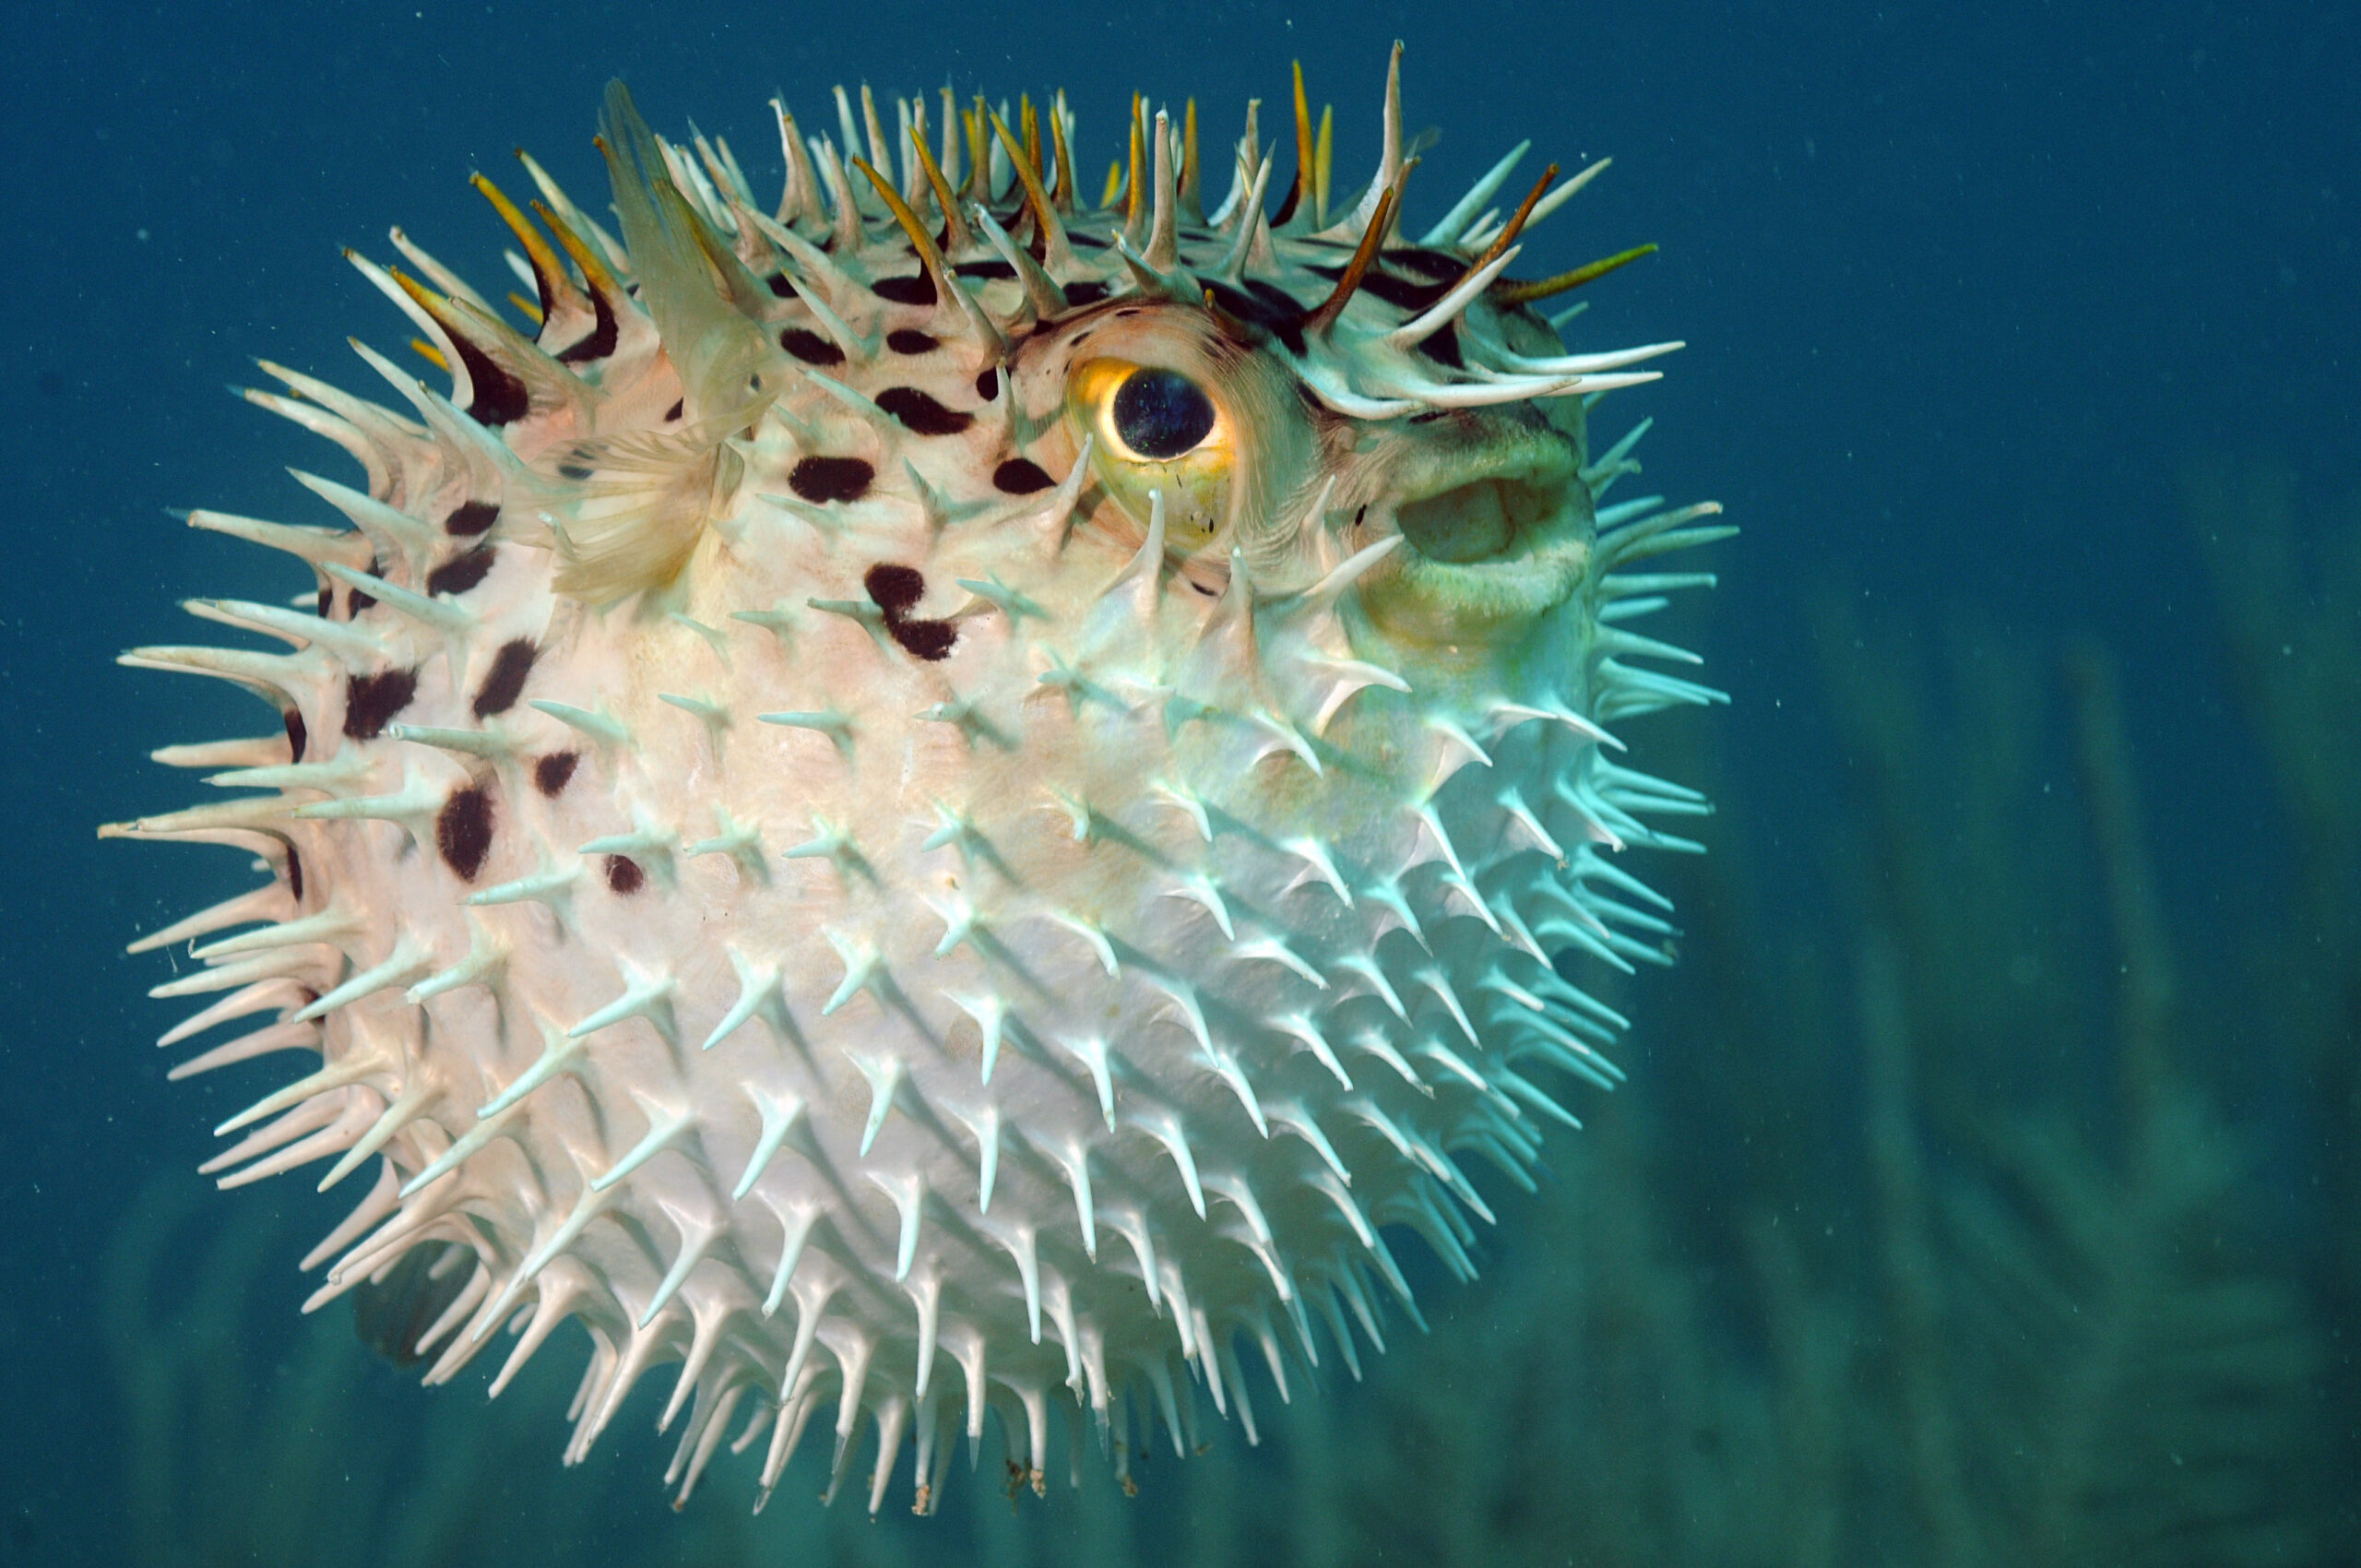 Alternative To Opioid May Be In Pufferfish Toxin